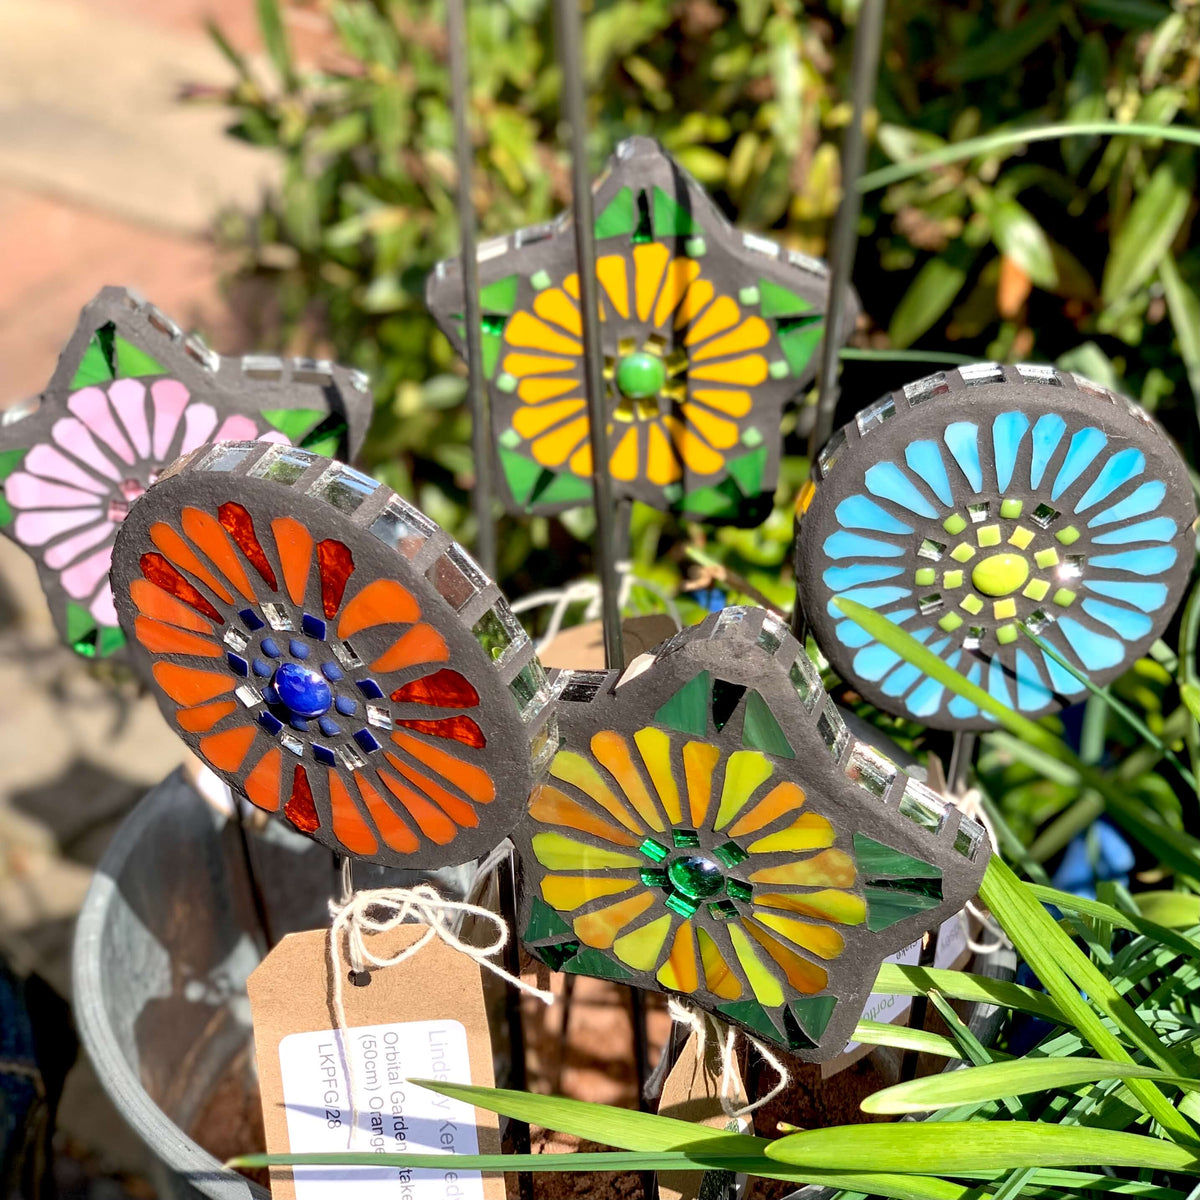 Handmade mosaic flower shaped garden stakes, in orange, yellow, pink and blue.